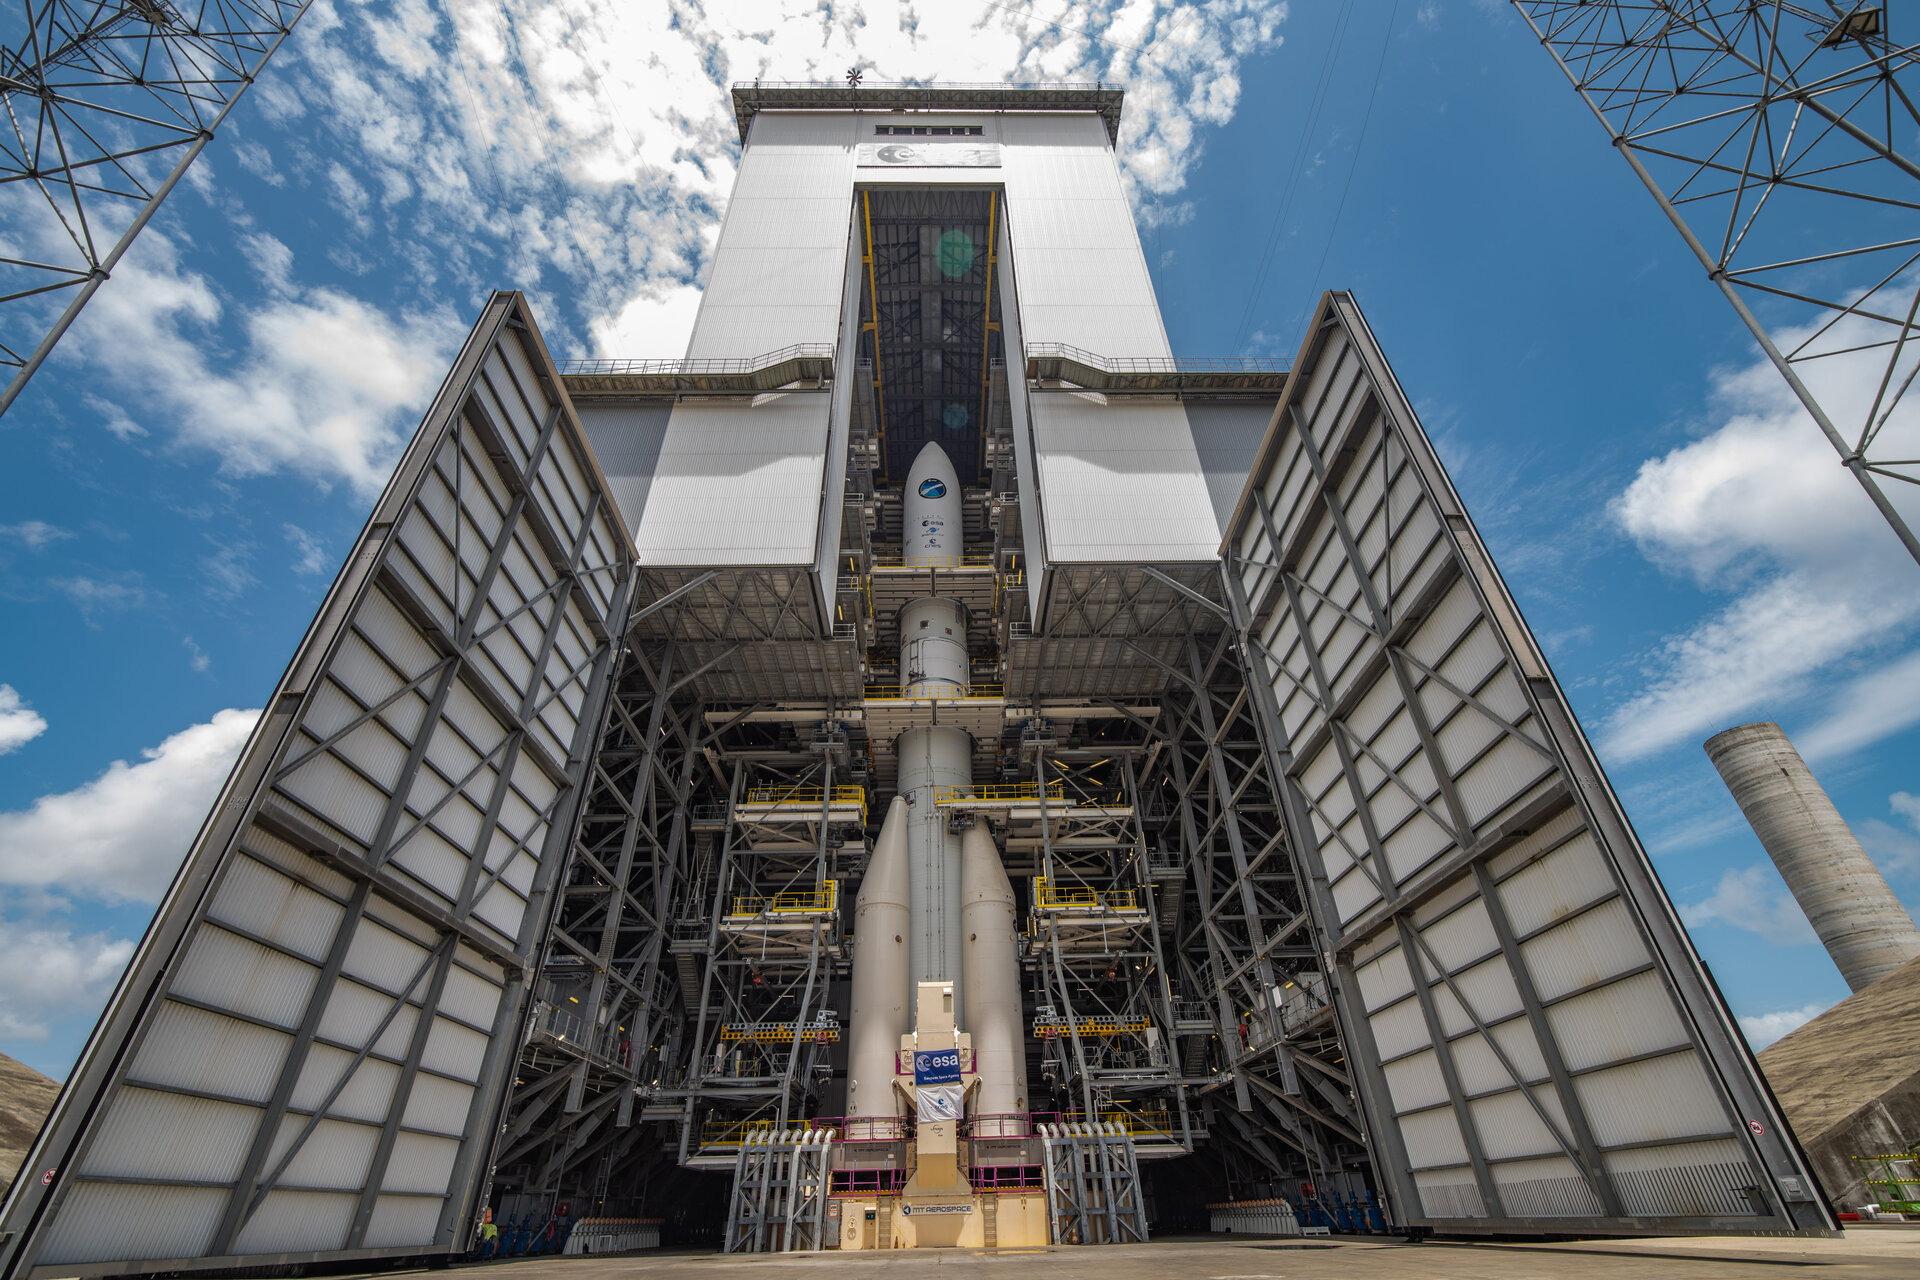 ARIANE 6 fully stacked